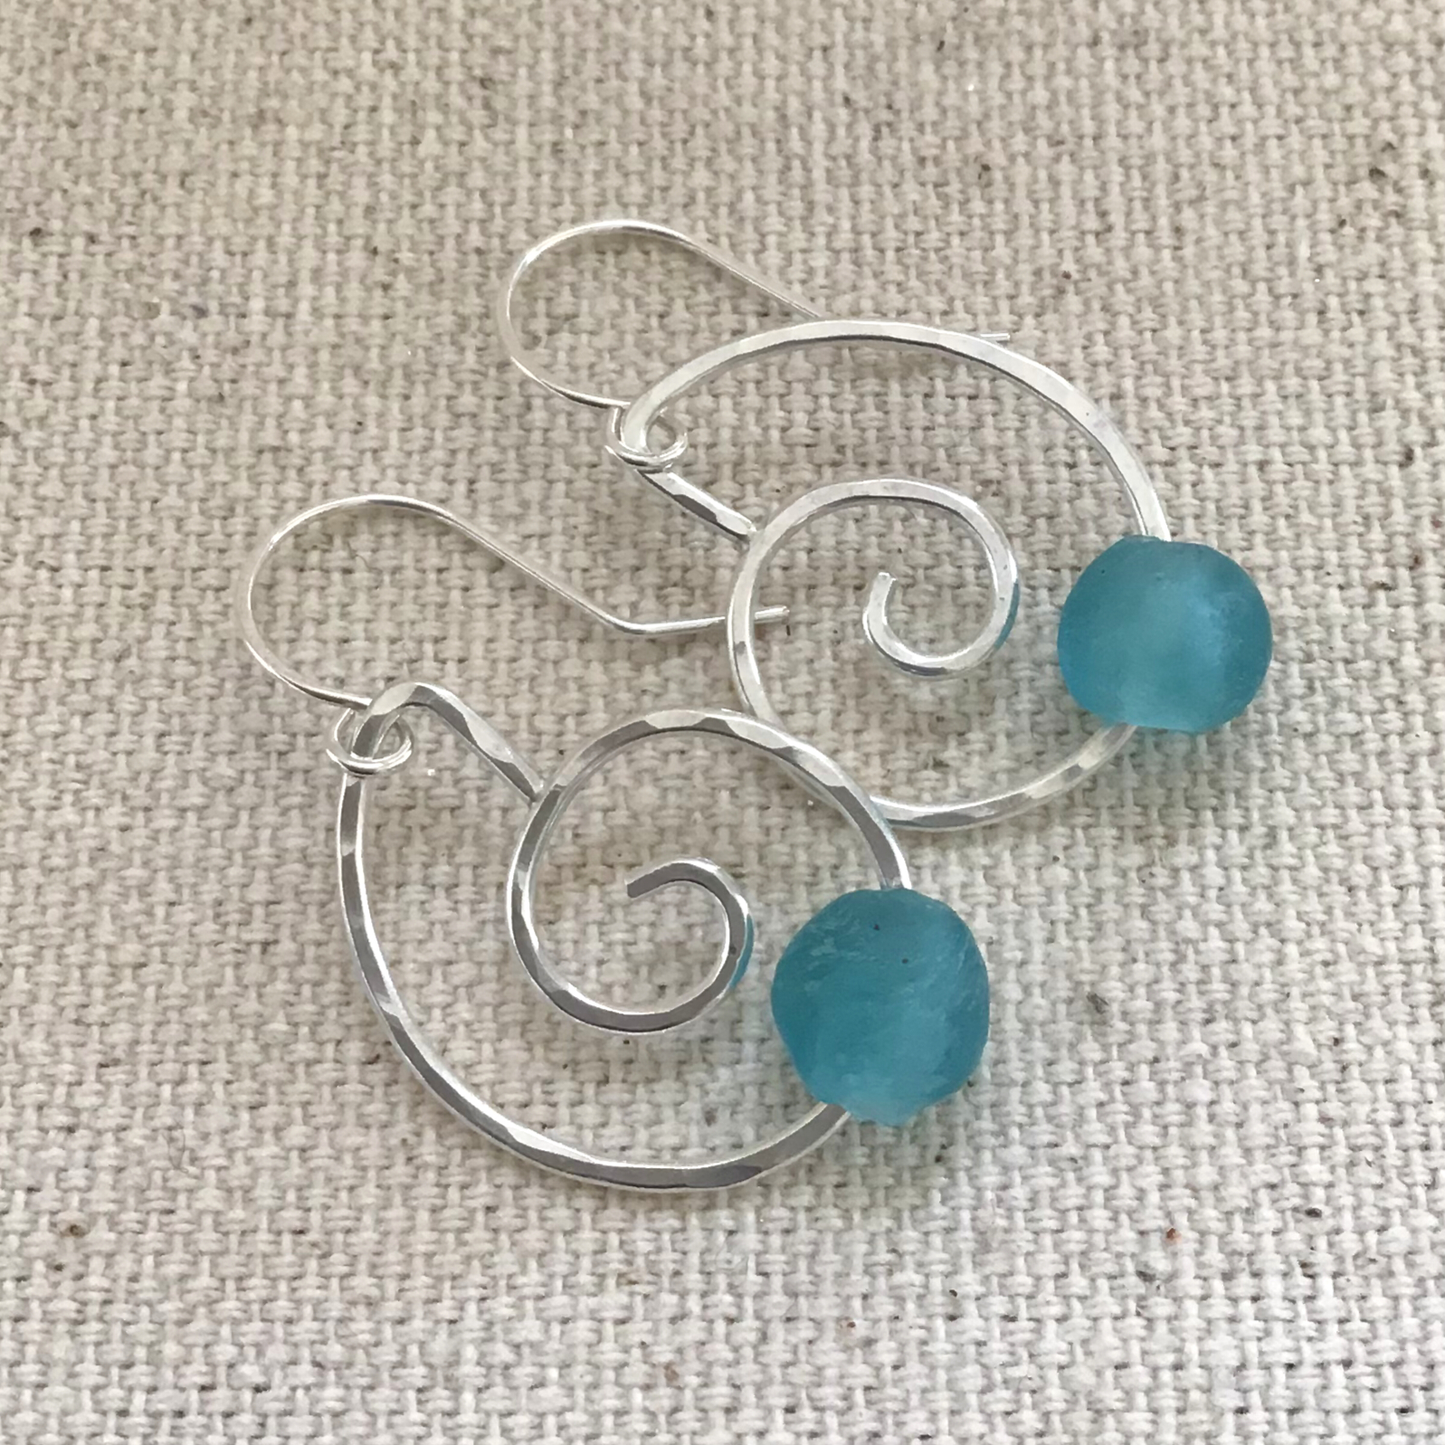 Seashell Dangle Earrings with Single Floating Recycled Glass Bead - Turquoise Blue